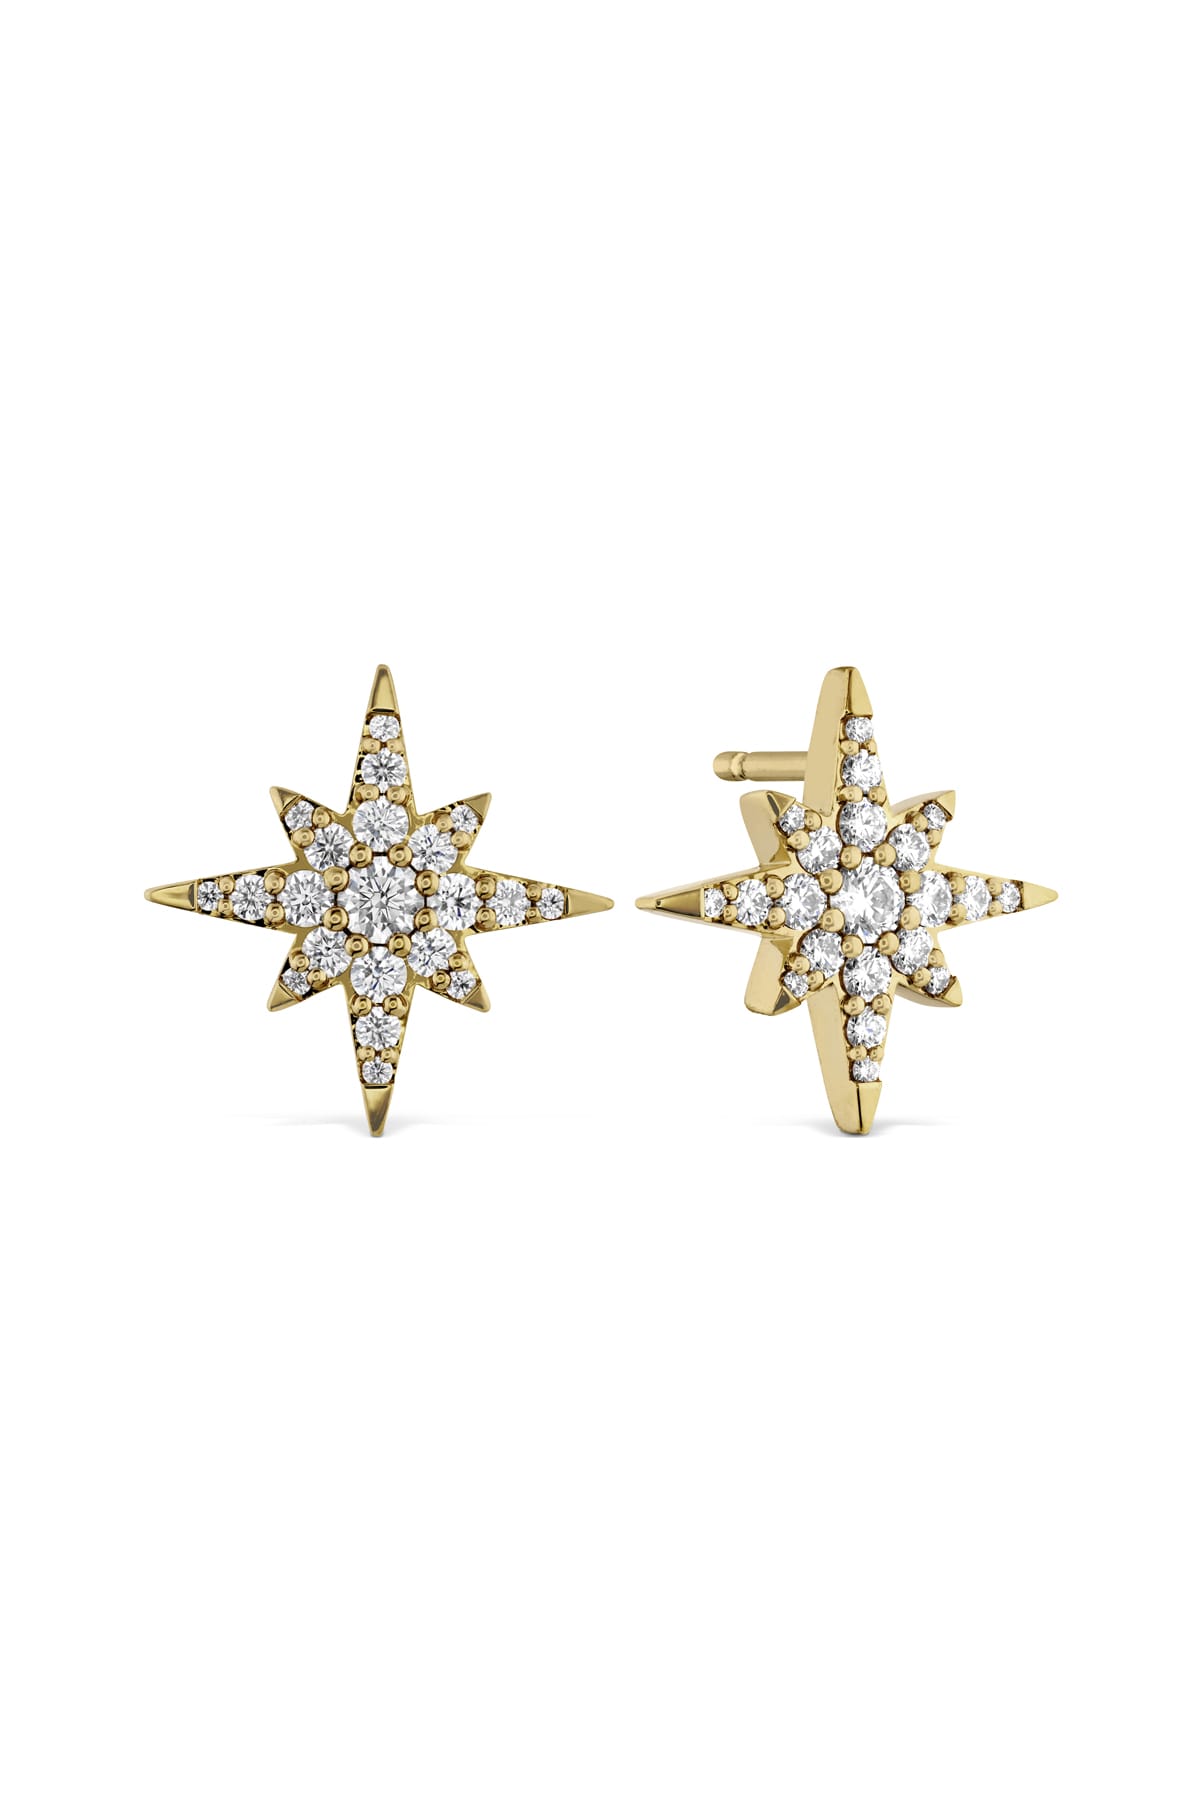 Charmed Starburst Diamond Earrings From Hearts On Fire available at LeGassick Diamonds and Jewellery Gold Coast, Australia.